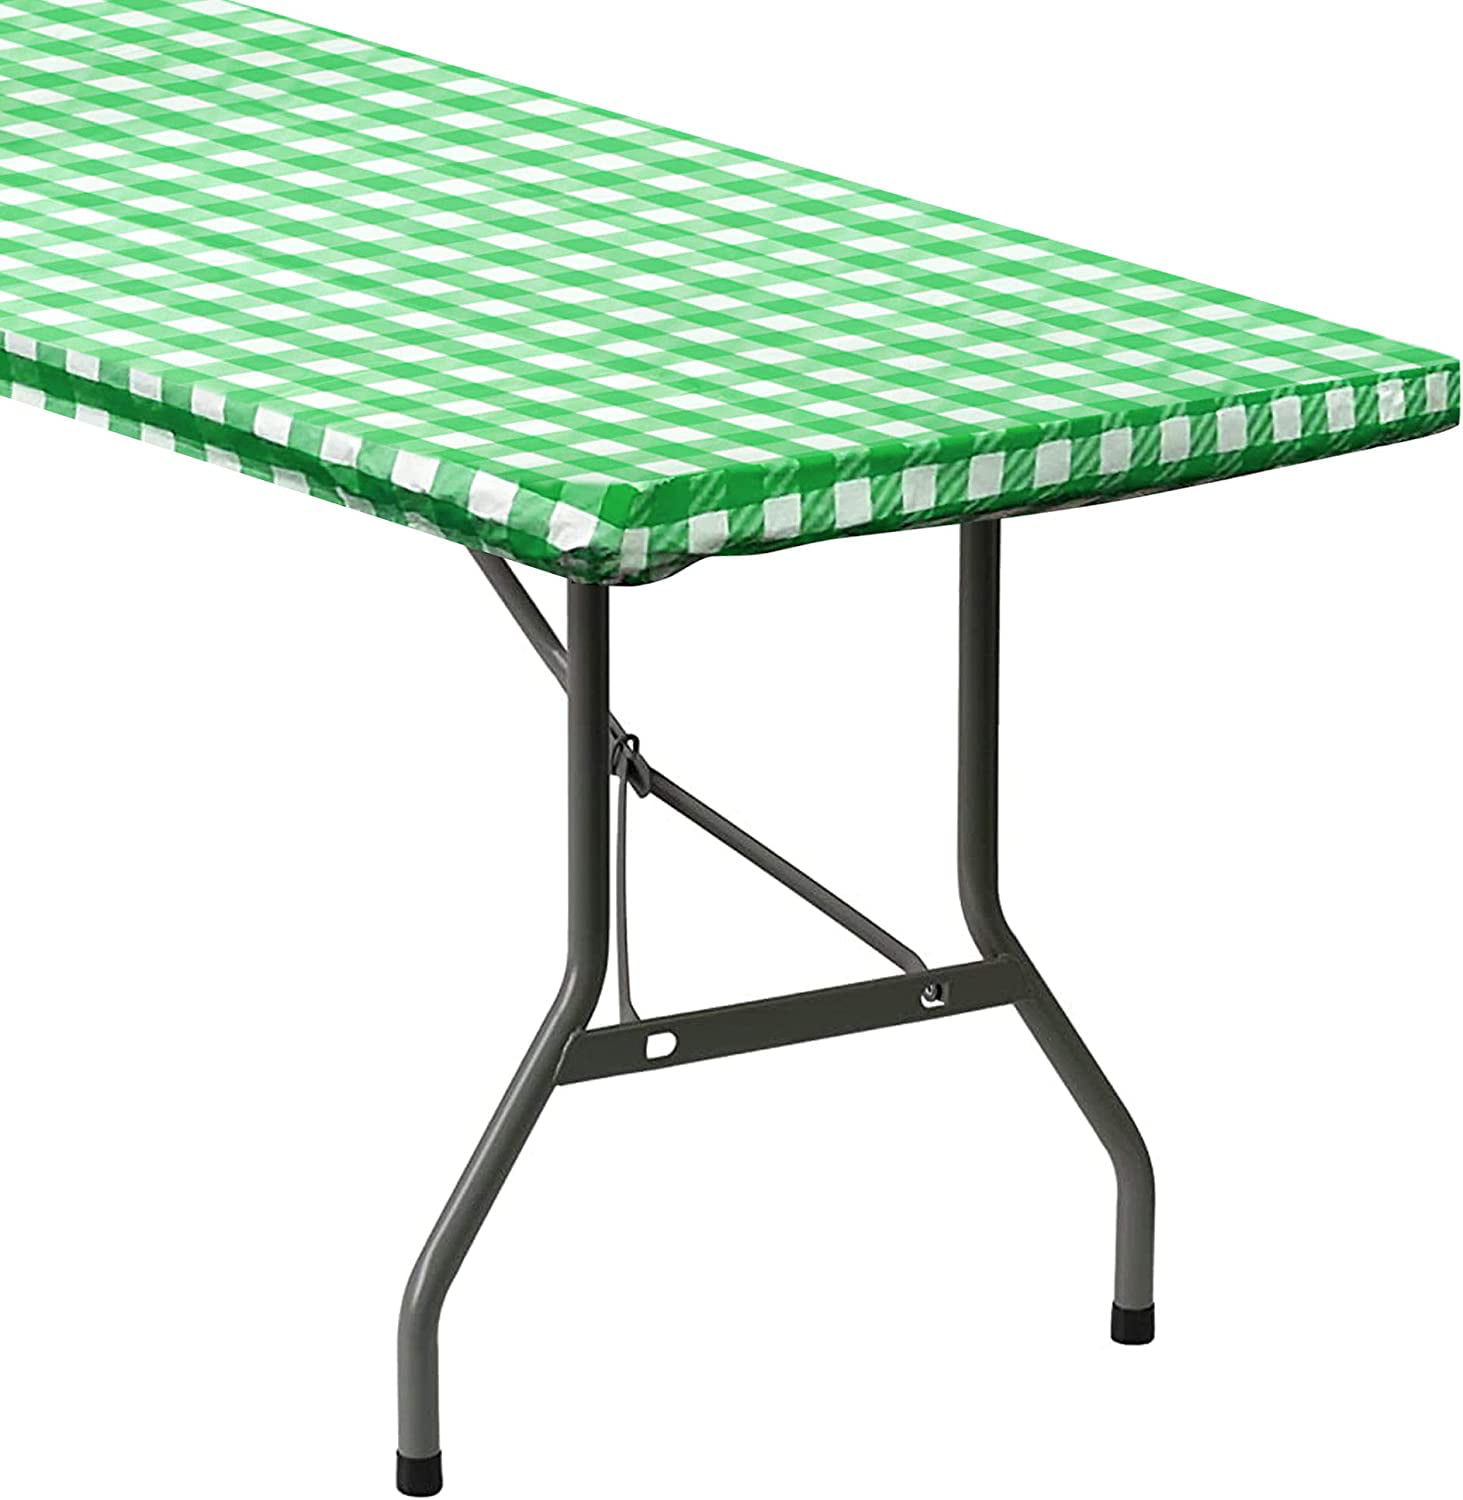 Standard Portable Perforated Picnic Tables with Your Choice of Size  (Multiple Colors Available!) - Leisure Craft